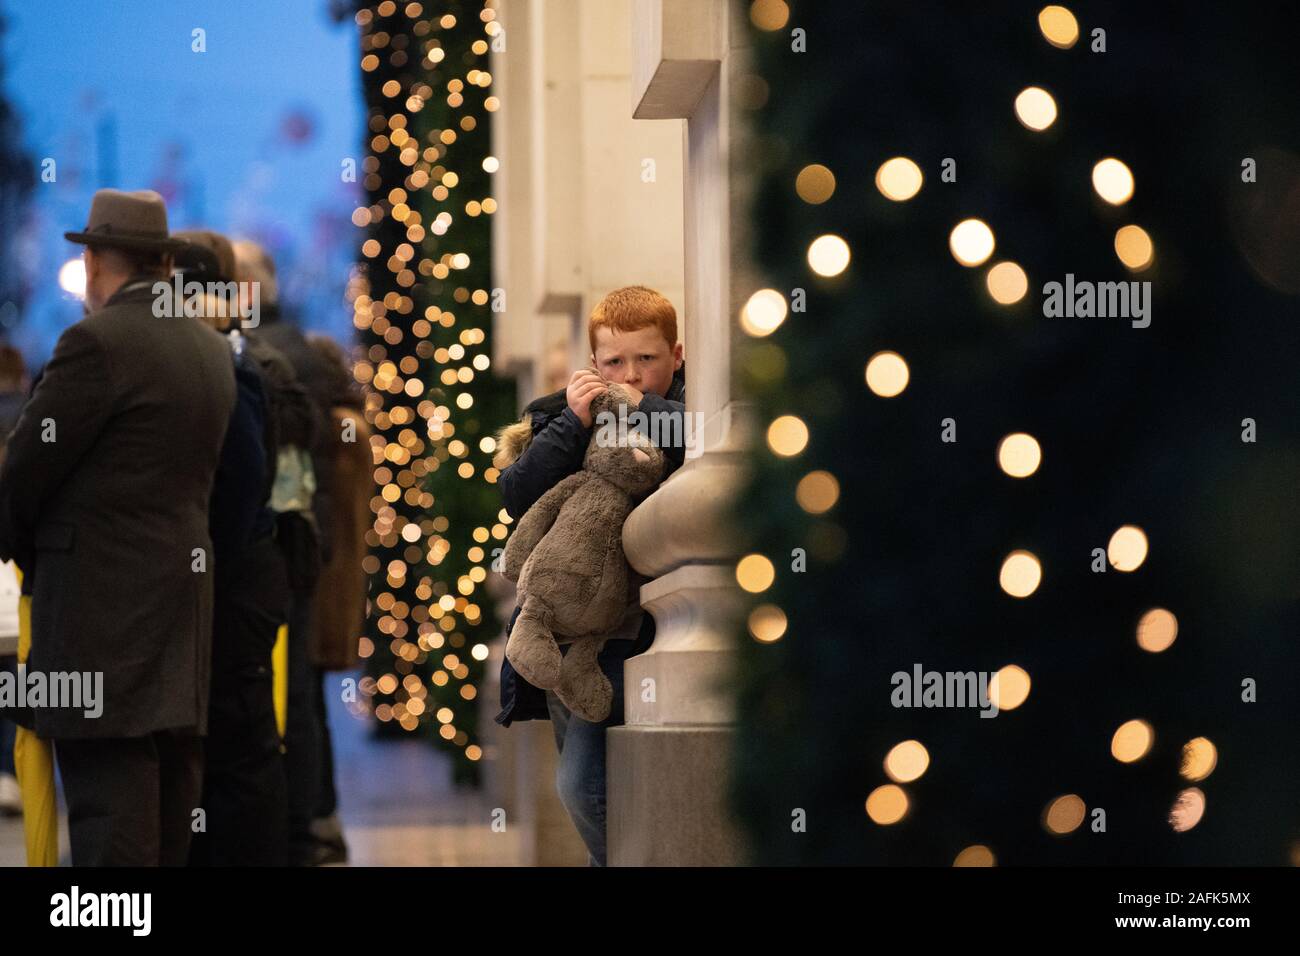 Small ginger hair boy holding a large soft toy bunny outside Selfridges looking at camera. Christmas lights and decorations in the background. London Stock Photo